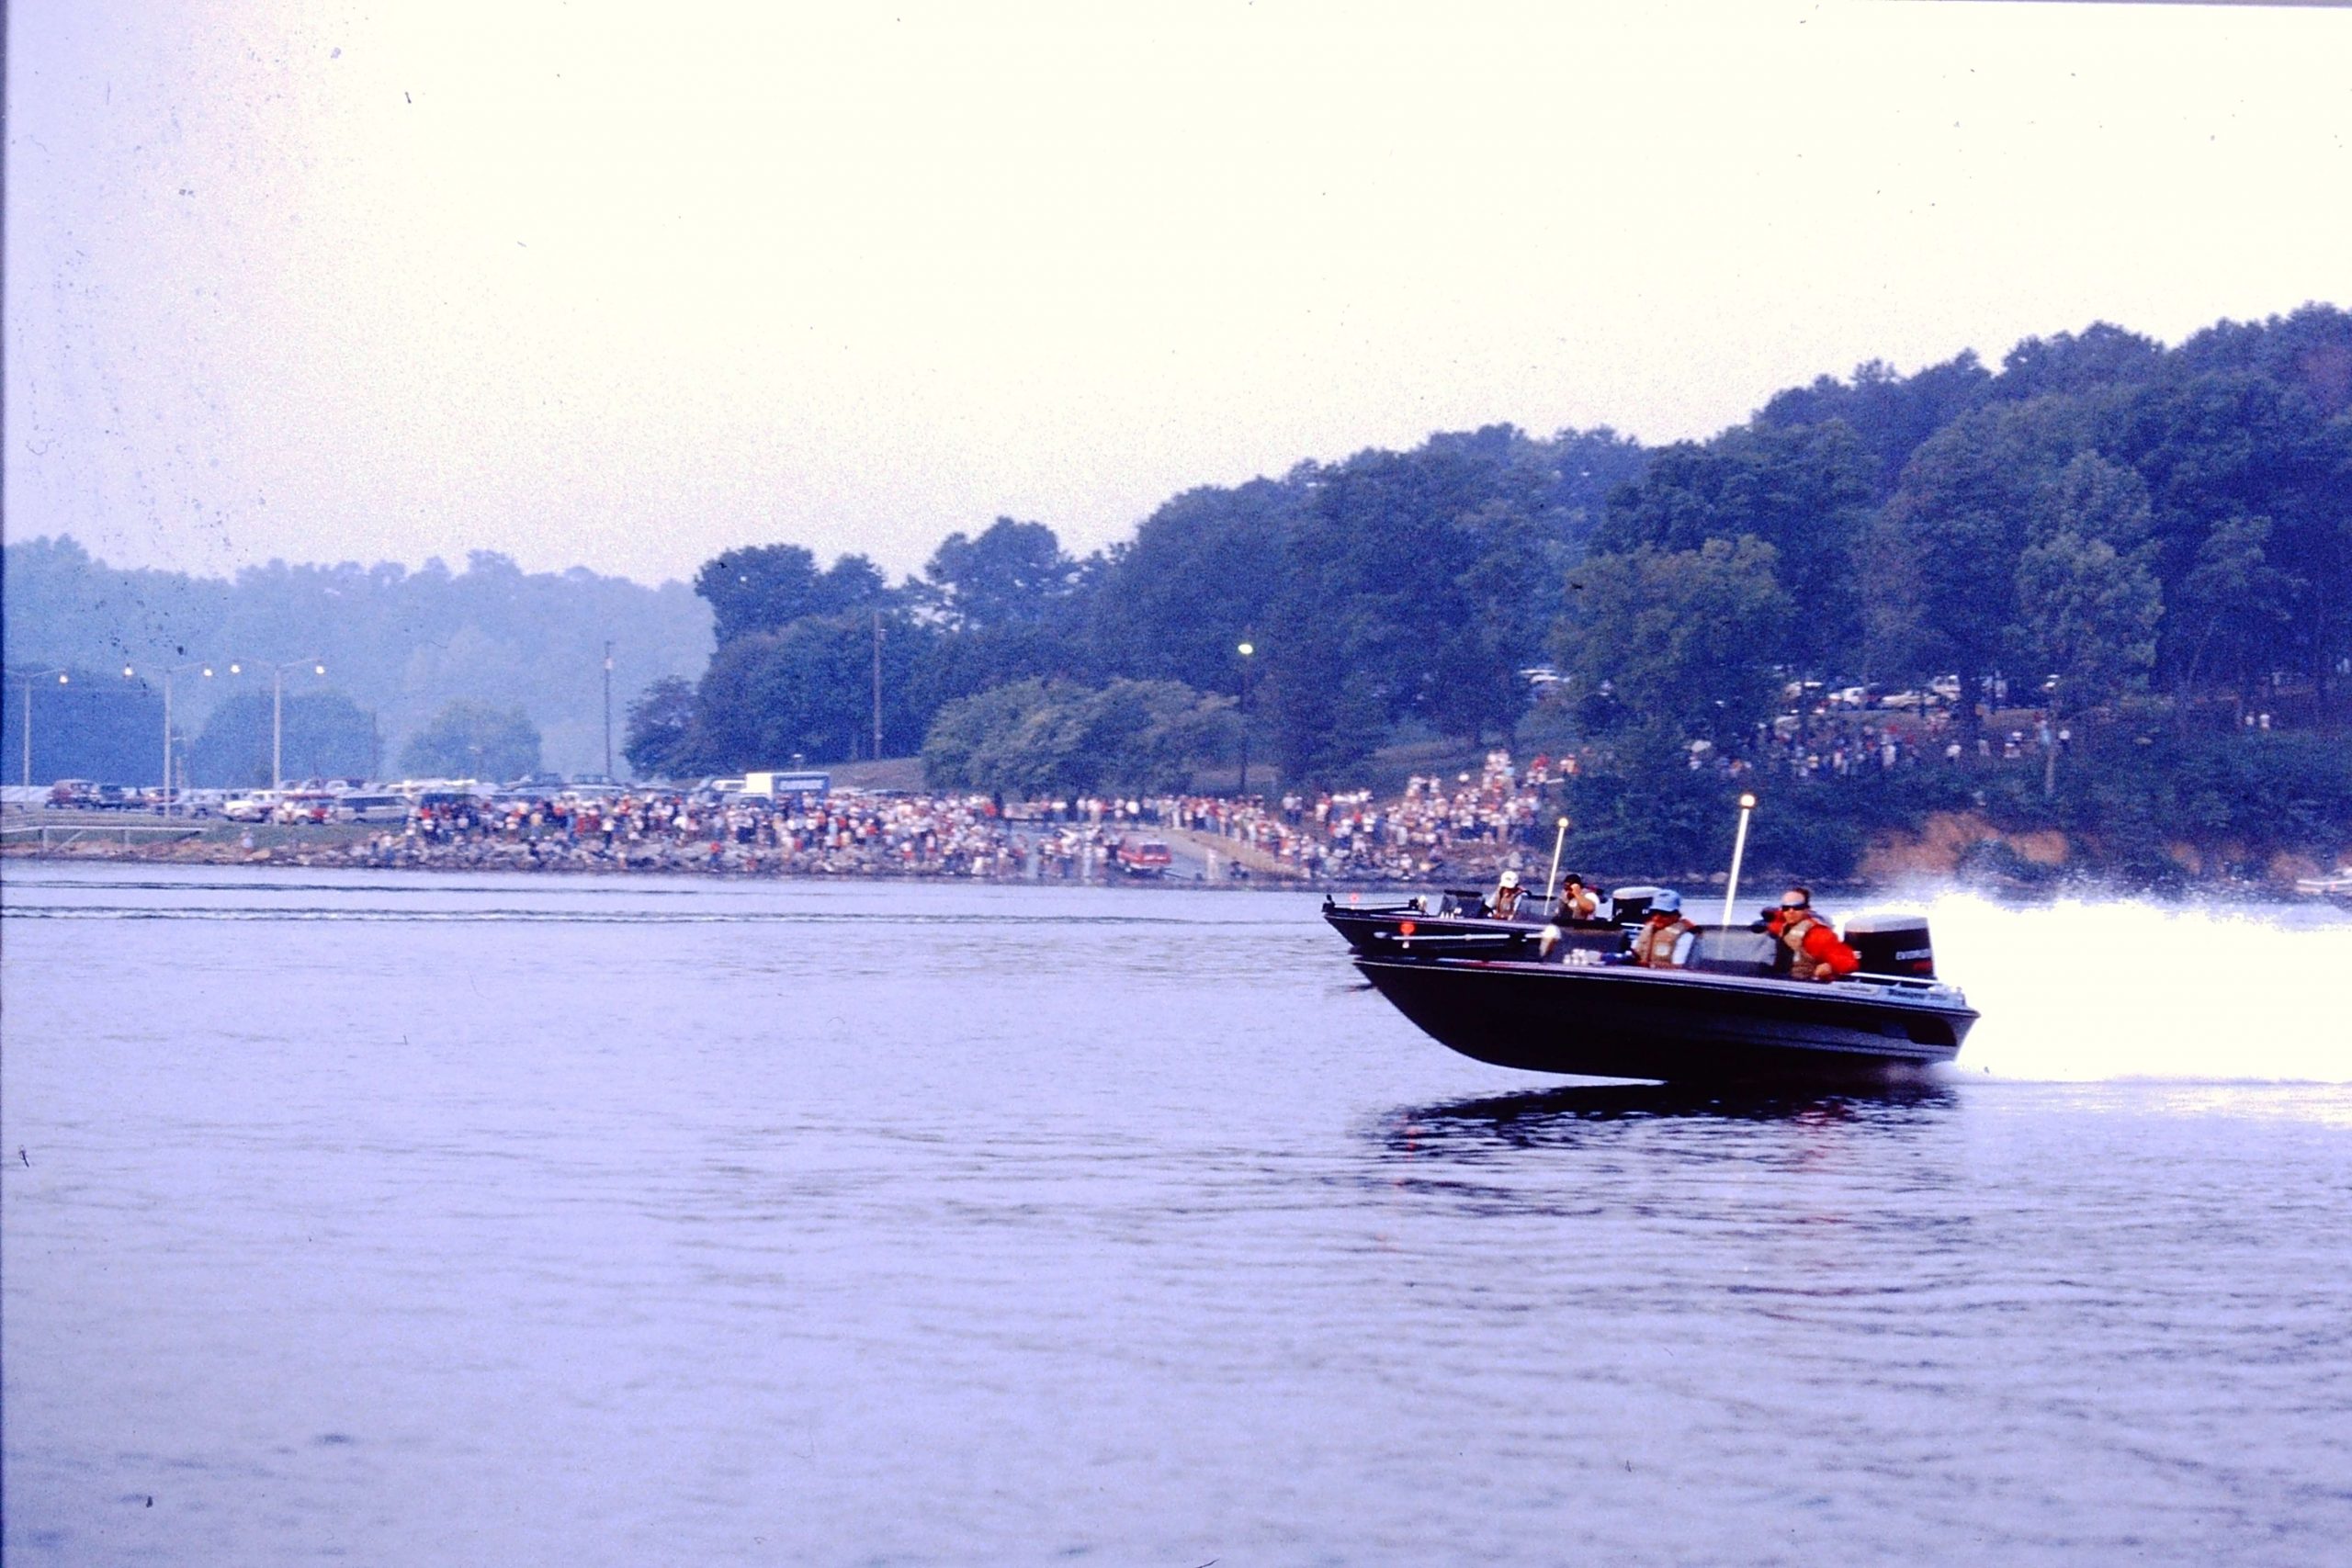 Crowds lined the banks for the daily launches at the 1986 Classic. Expect to see even more fans at BASSfest with all the activities going on, including seminars by the pros, a High School Elite Experience and a Carhartt College Bassmaster Series being held concurrently.